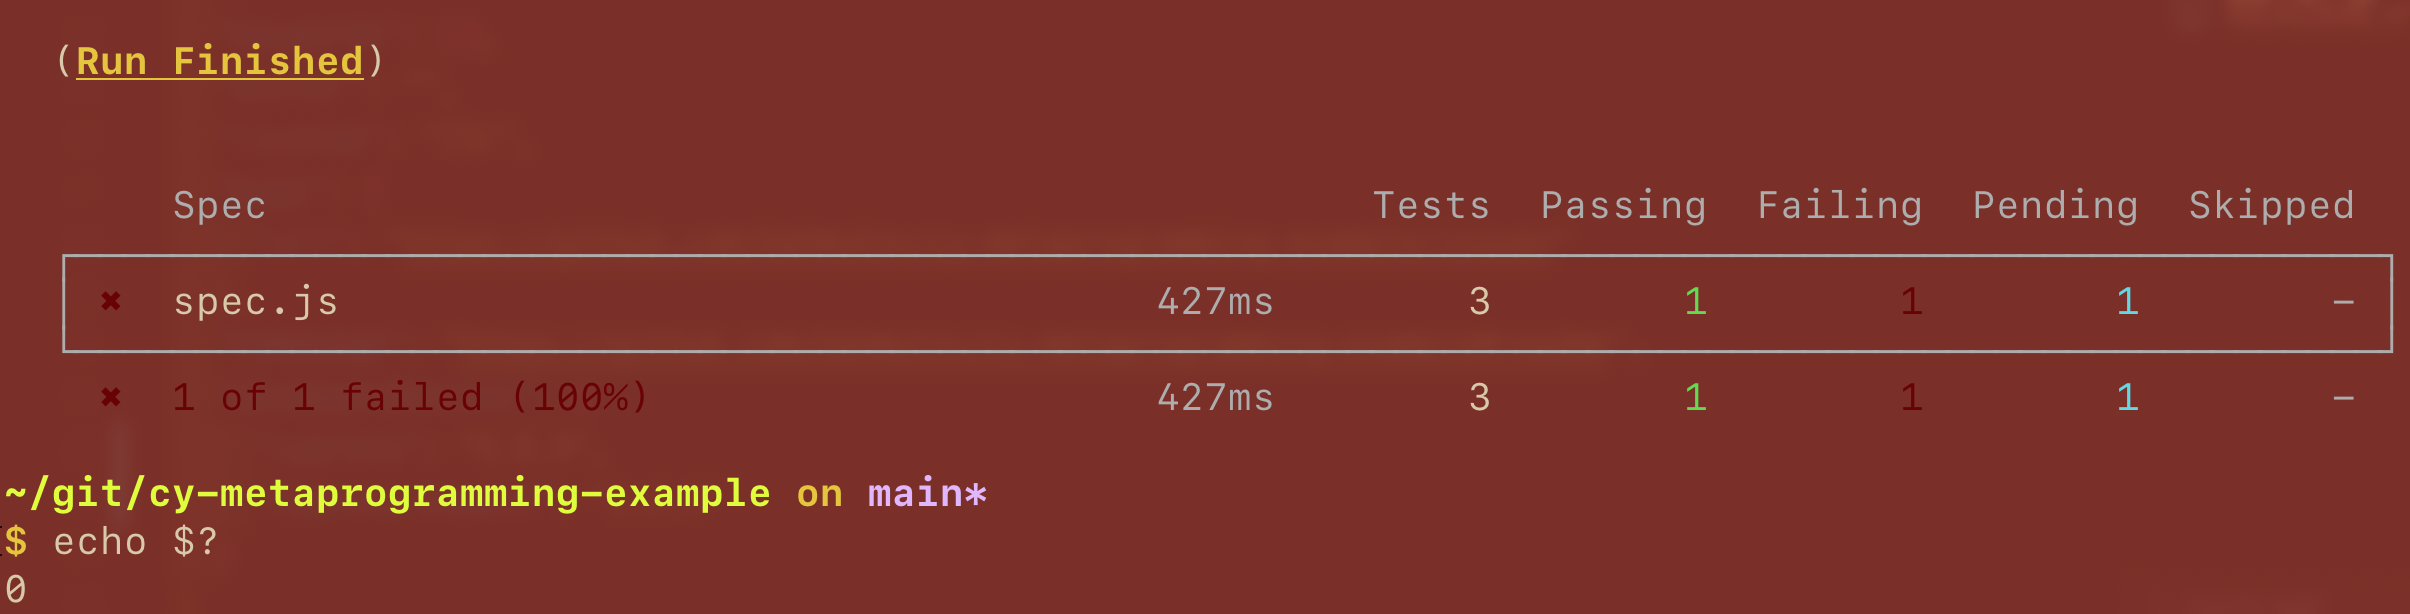 The expected numbers of tests